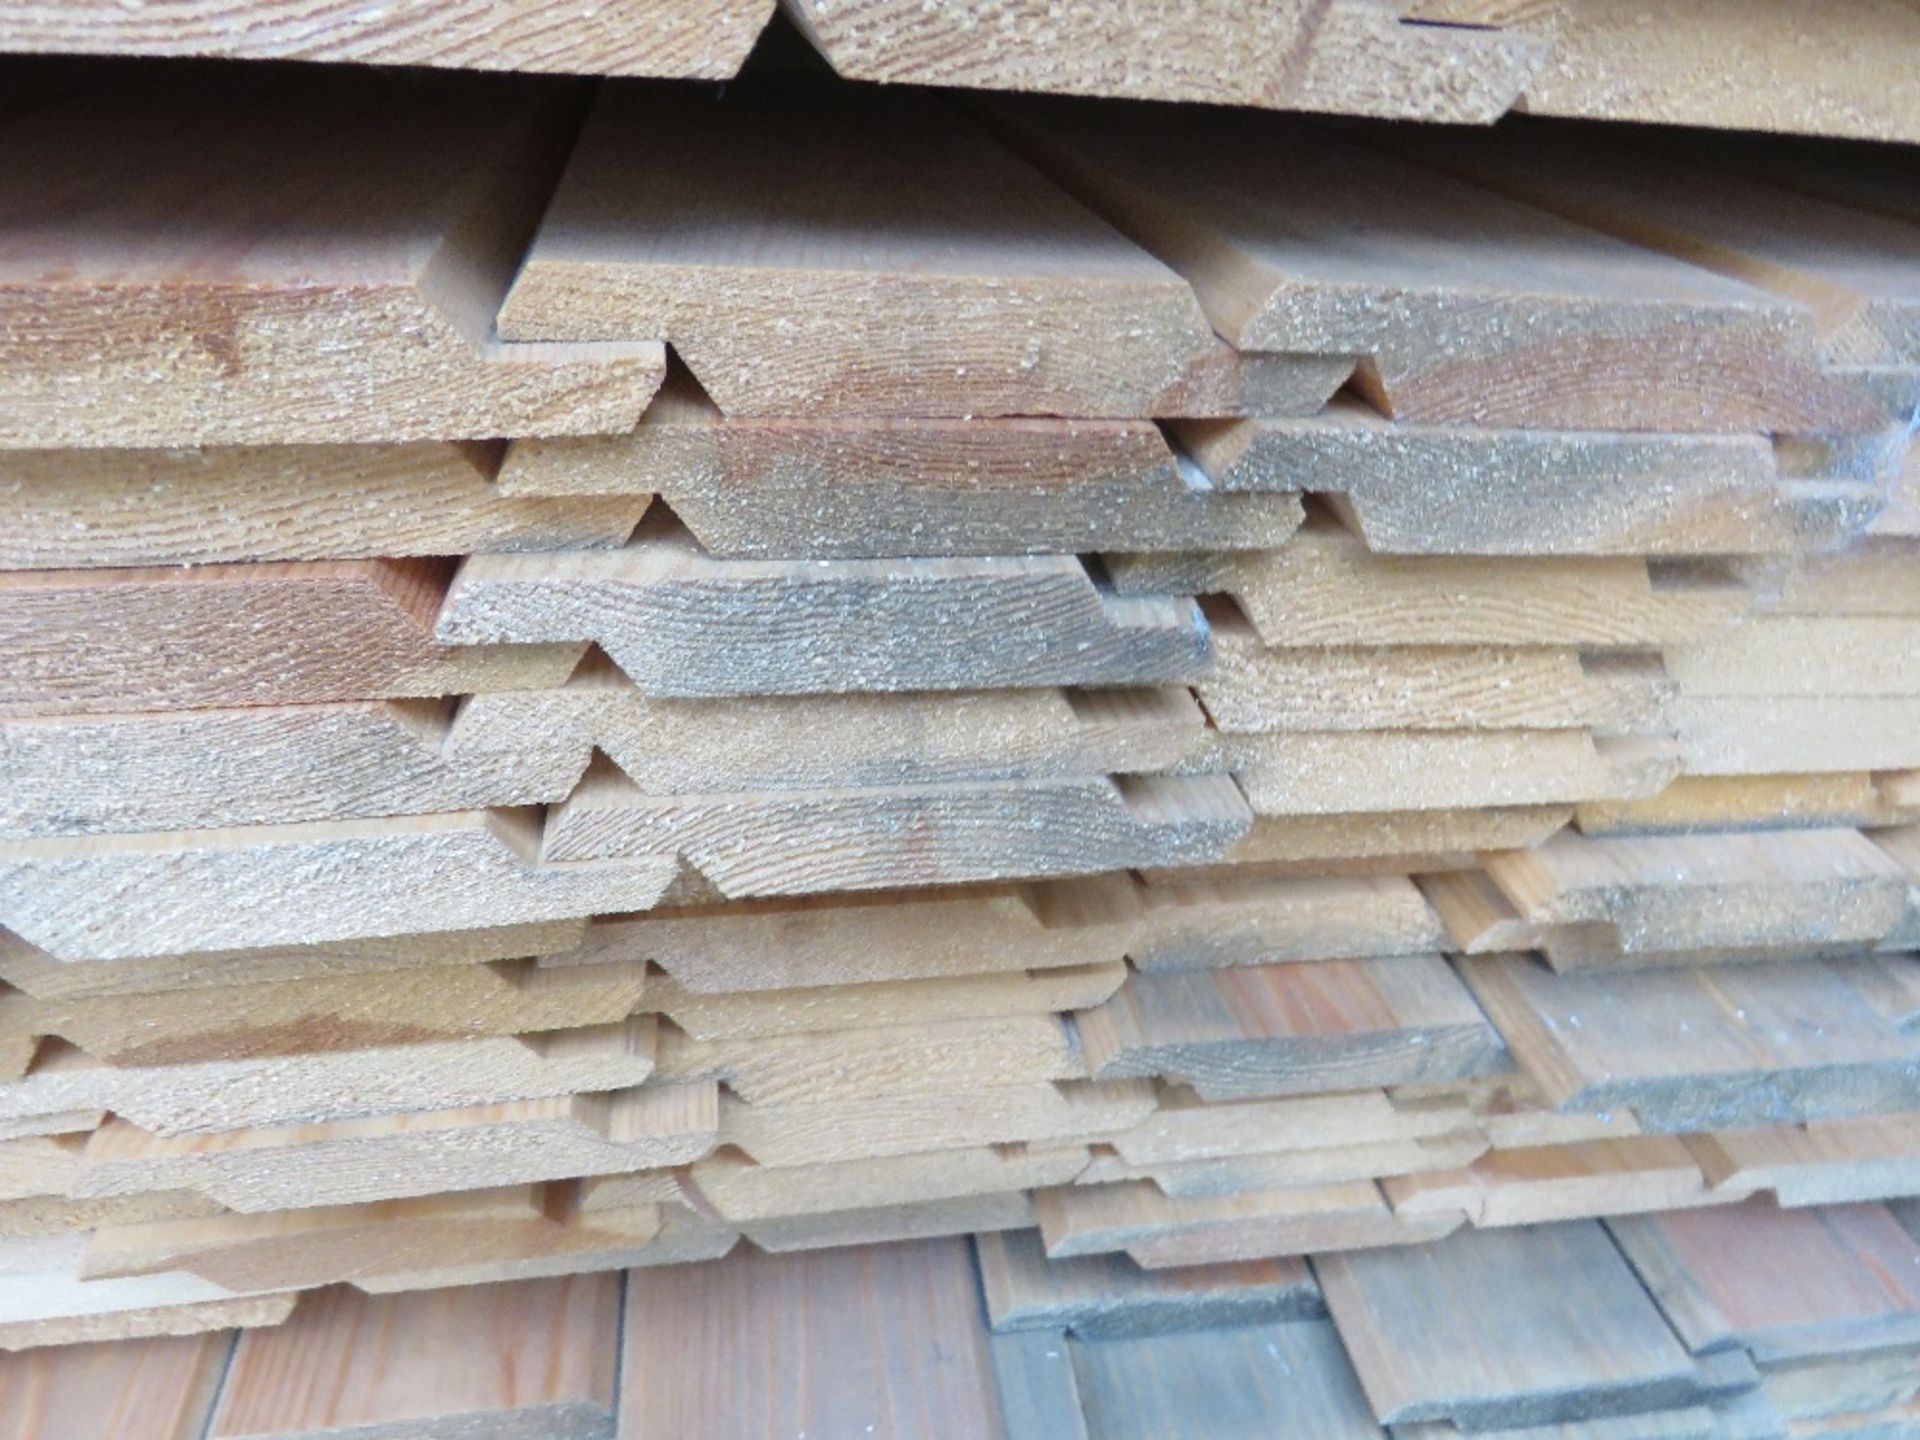 EXTRA LARGE PACK OF UNTREATED SHIPLAP CLADDING TIMBER BOARDS: 1.73M LENGTH X 10CM WIDTH APPROX. - Image 3 of 3